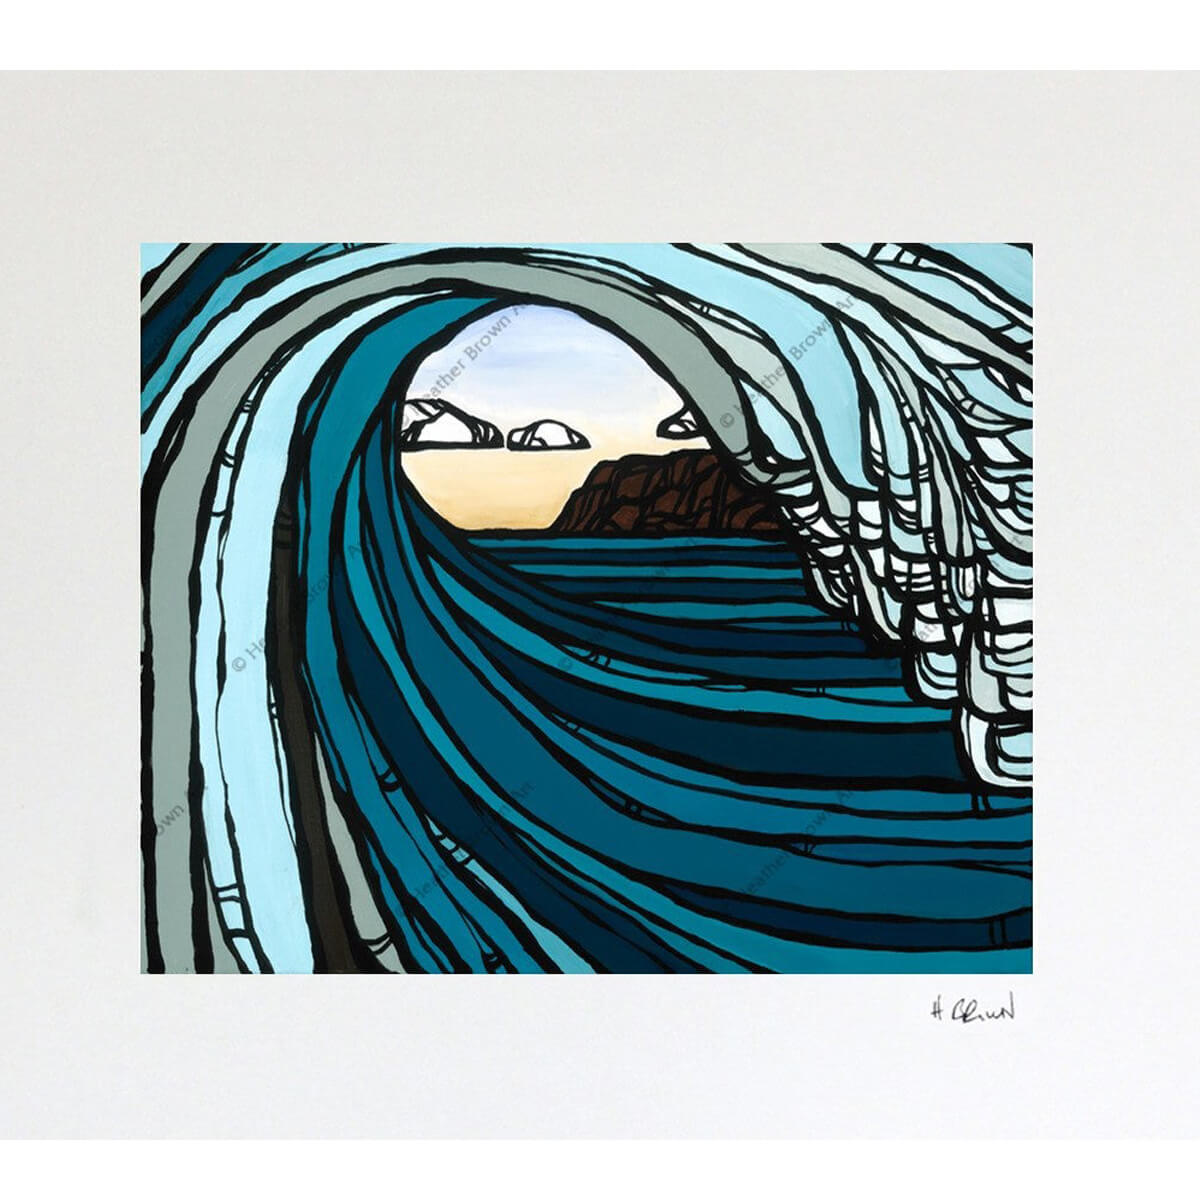 White matted print of Barrel View, showing a perfect Hawaiian wave